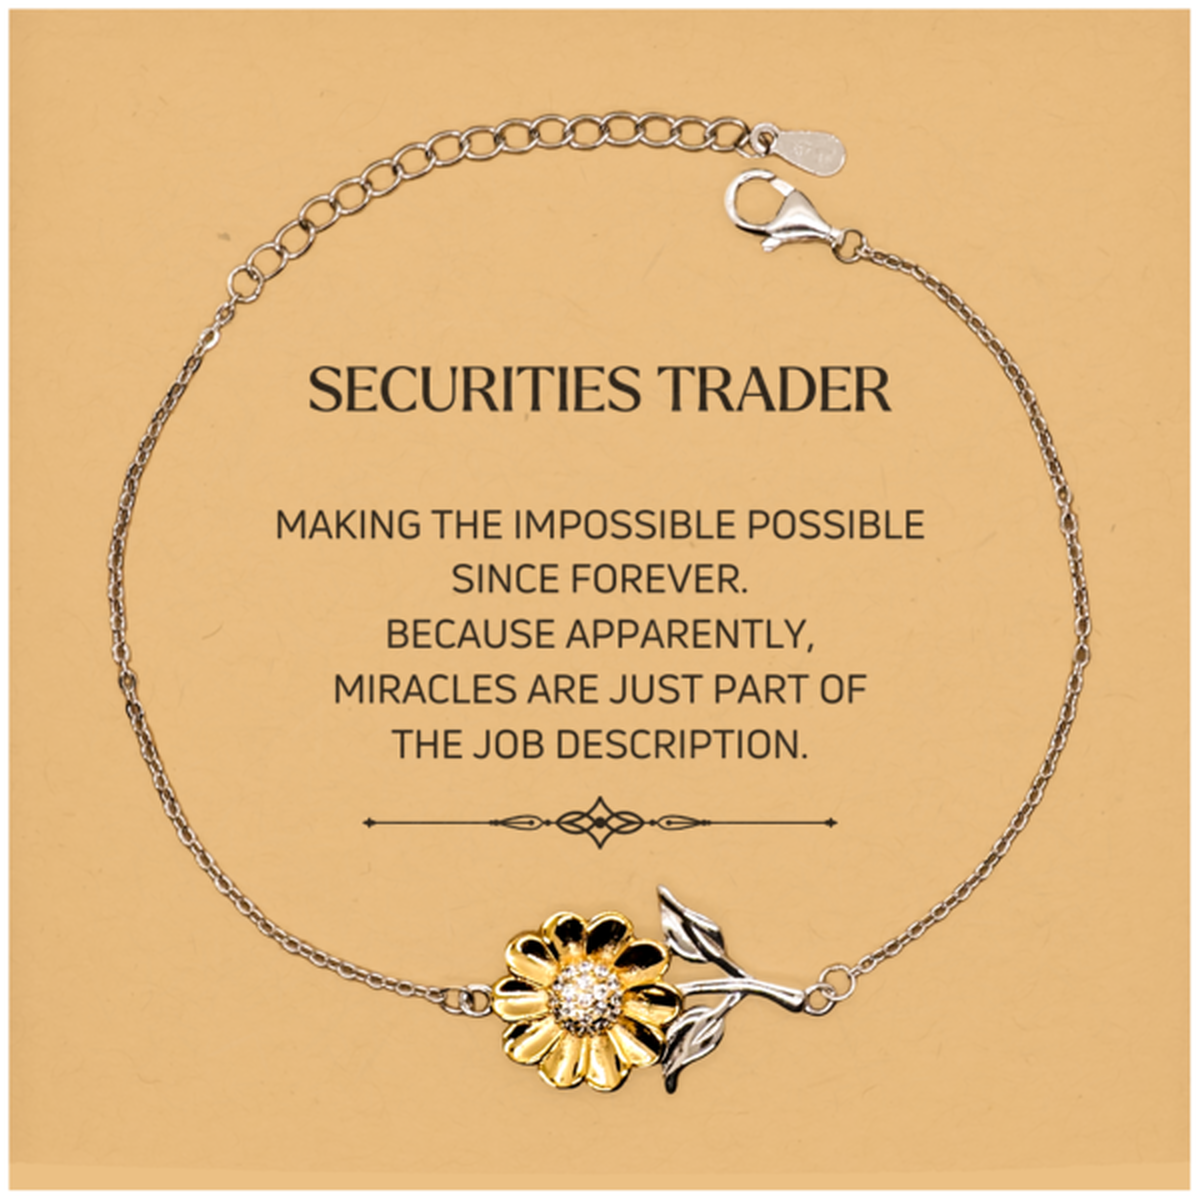 Funny Securities Trader Gifts, Miracles are just part of the job description, Inspirational Birthday Christmas Sunflower Bracelet For Securities Trader, Men, Women, Coworkers, Friends, Boss